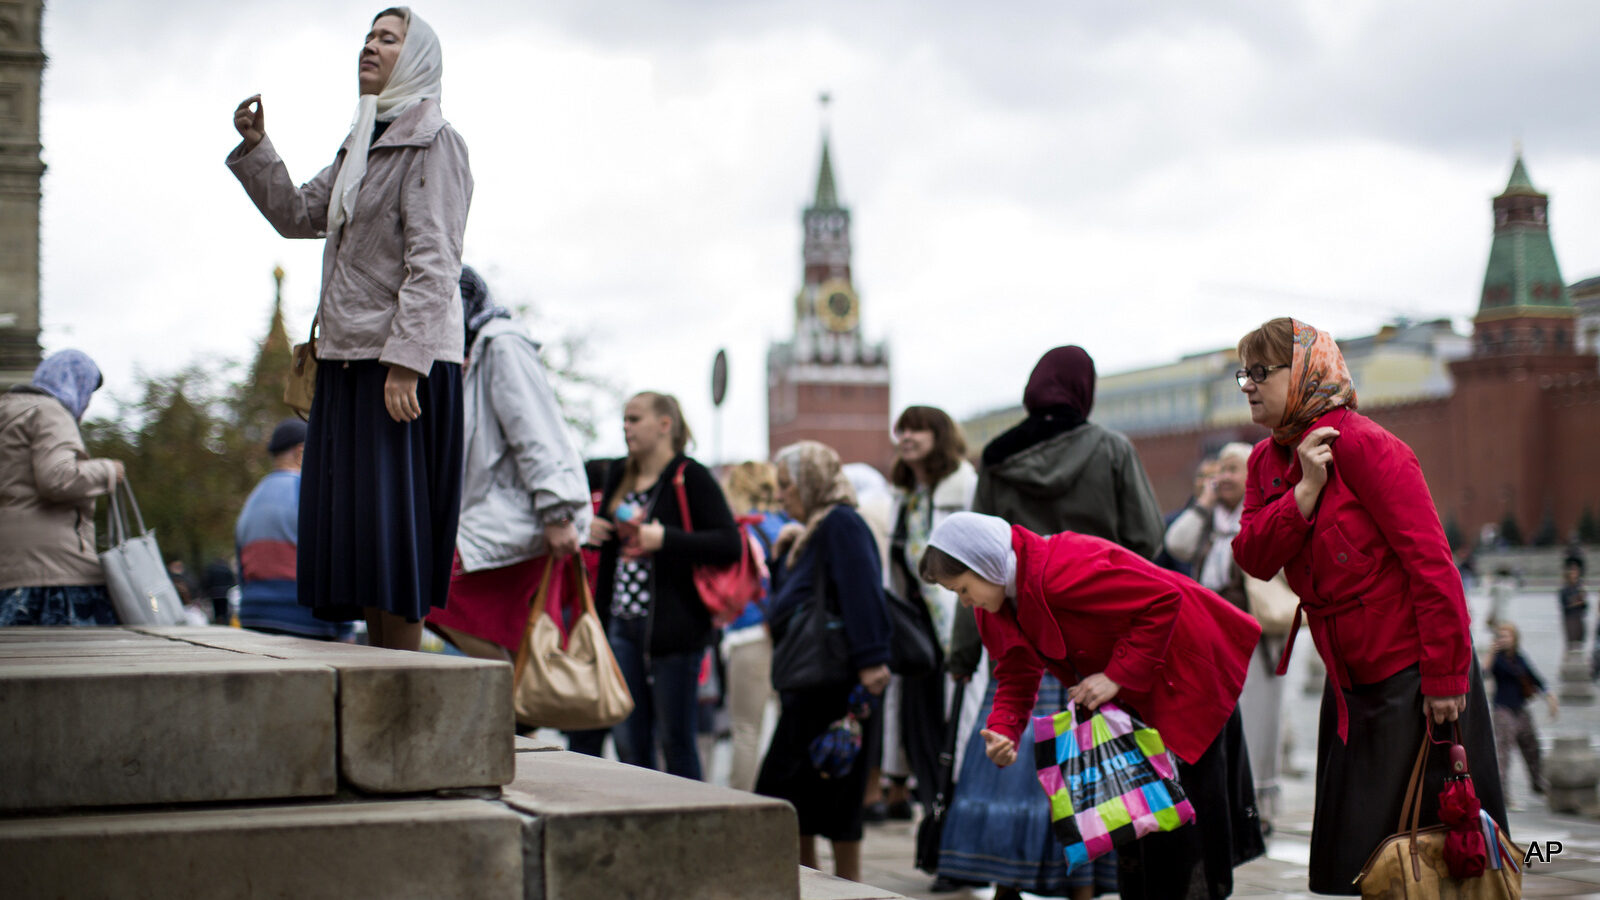 People cross themselves as they leave the Church of the Kazan Mother of God in Red Square after a religion service in honor of the Kazan Icon of the Mother of God in Moscow, Russia, Tuesday, July 21, 2015, with the Kremlin Wall and Spasskaya Tower are in the background. (